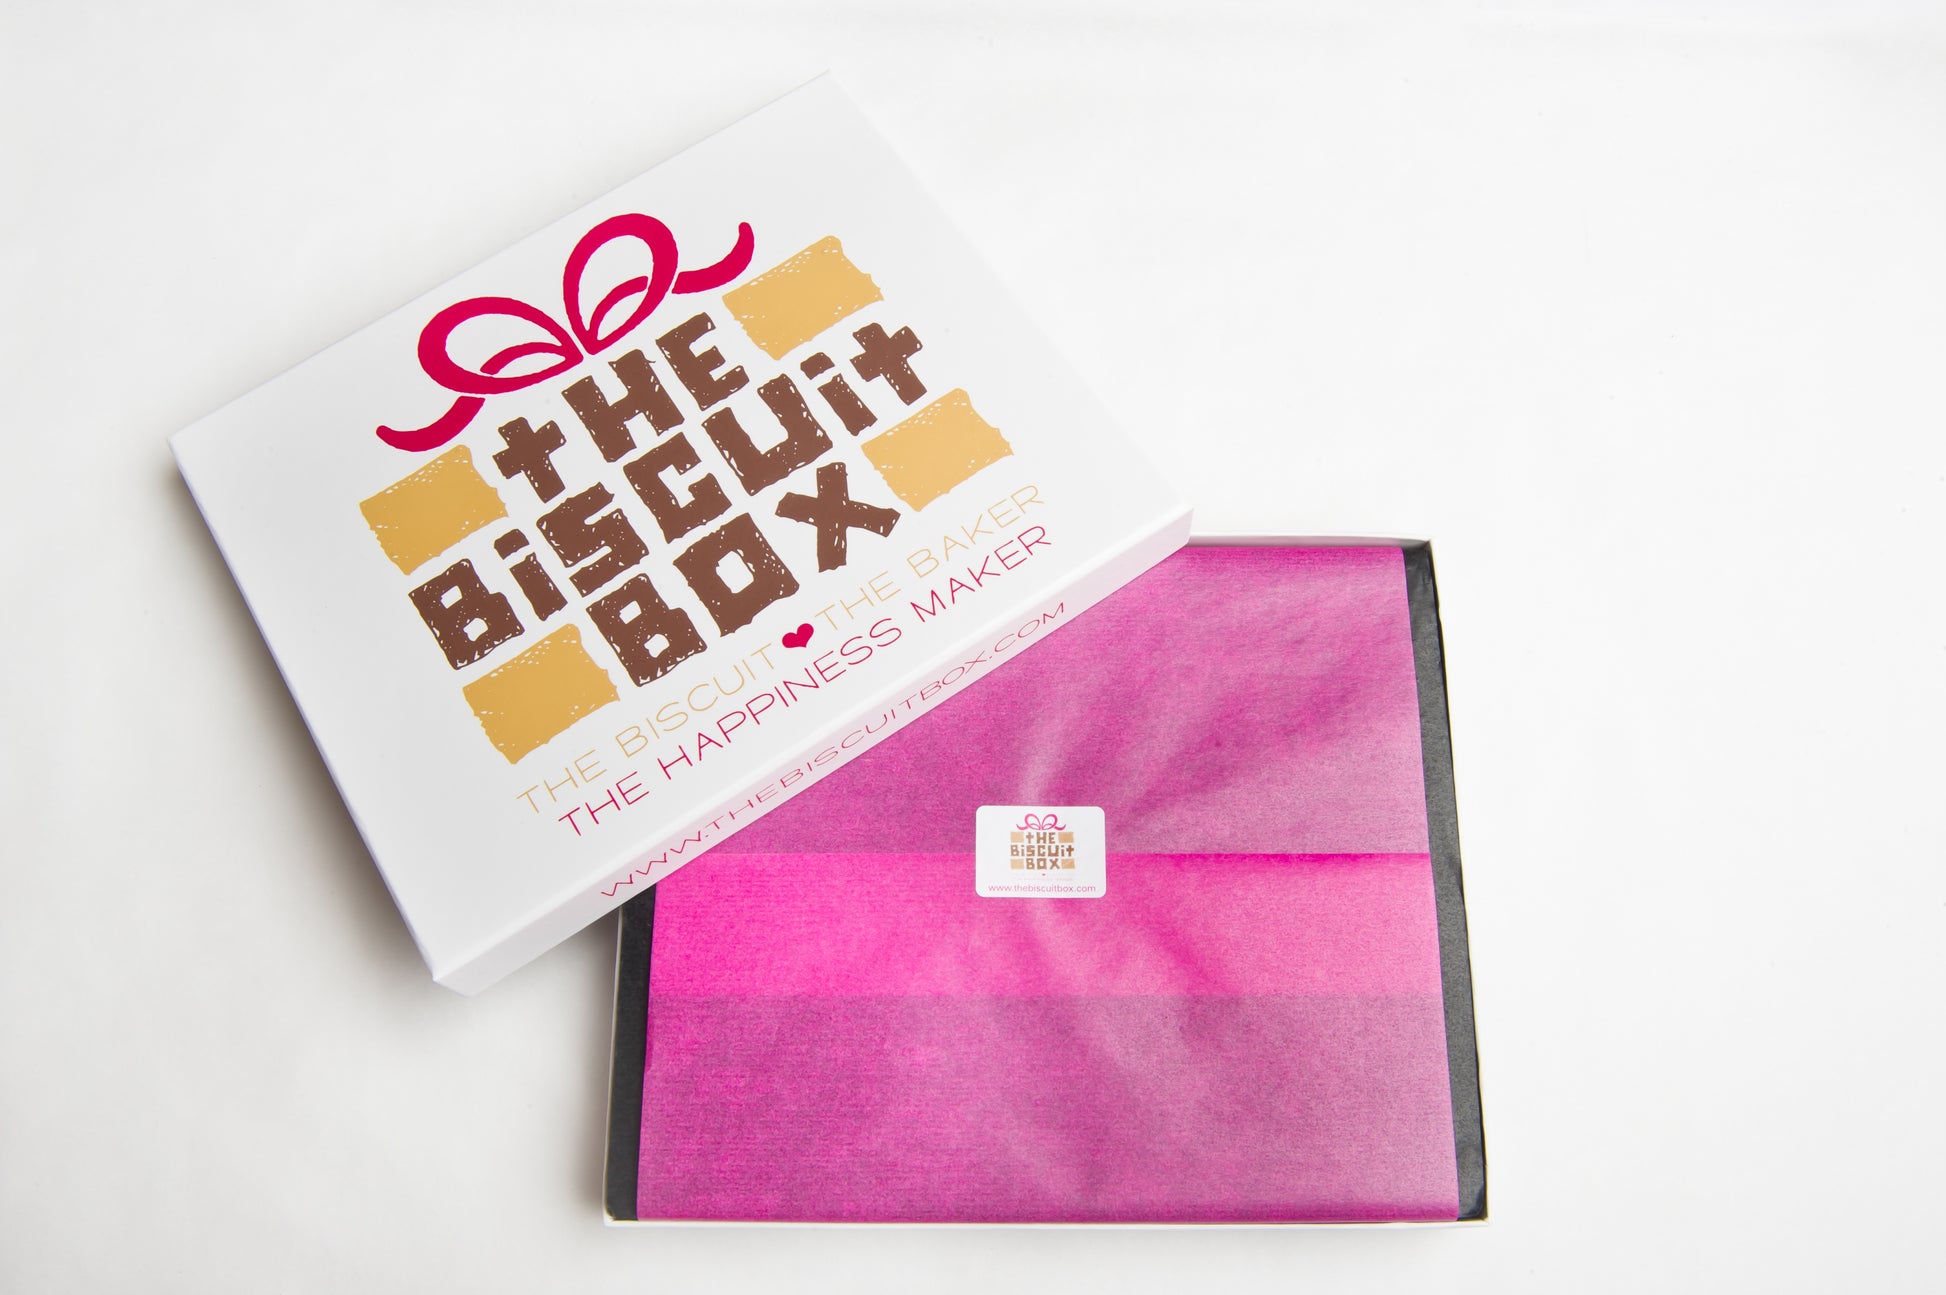 biscuit box packaging. branded biscuit lid with pink tissue paper in the larger box size. biscuit box to be sent through the letterbox.